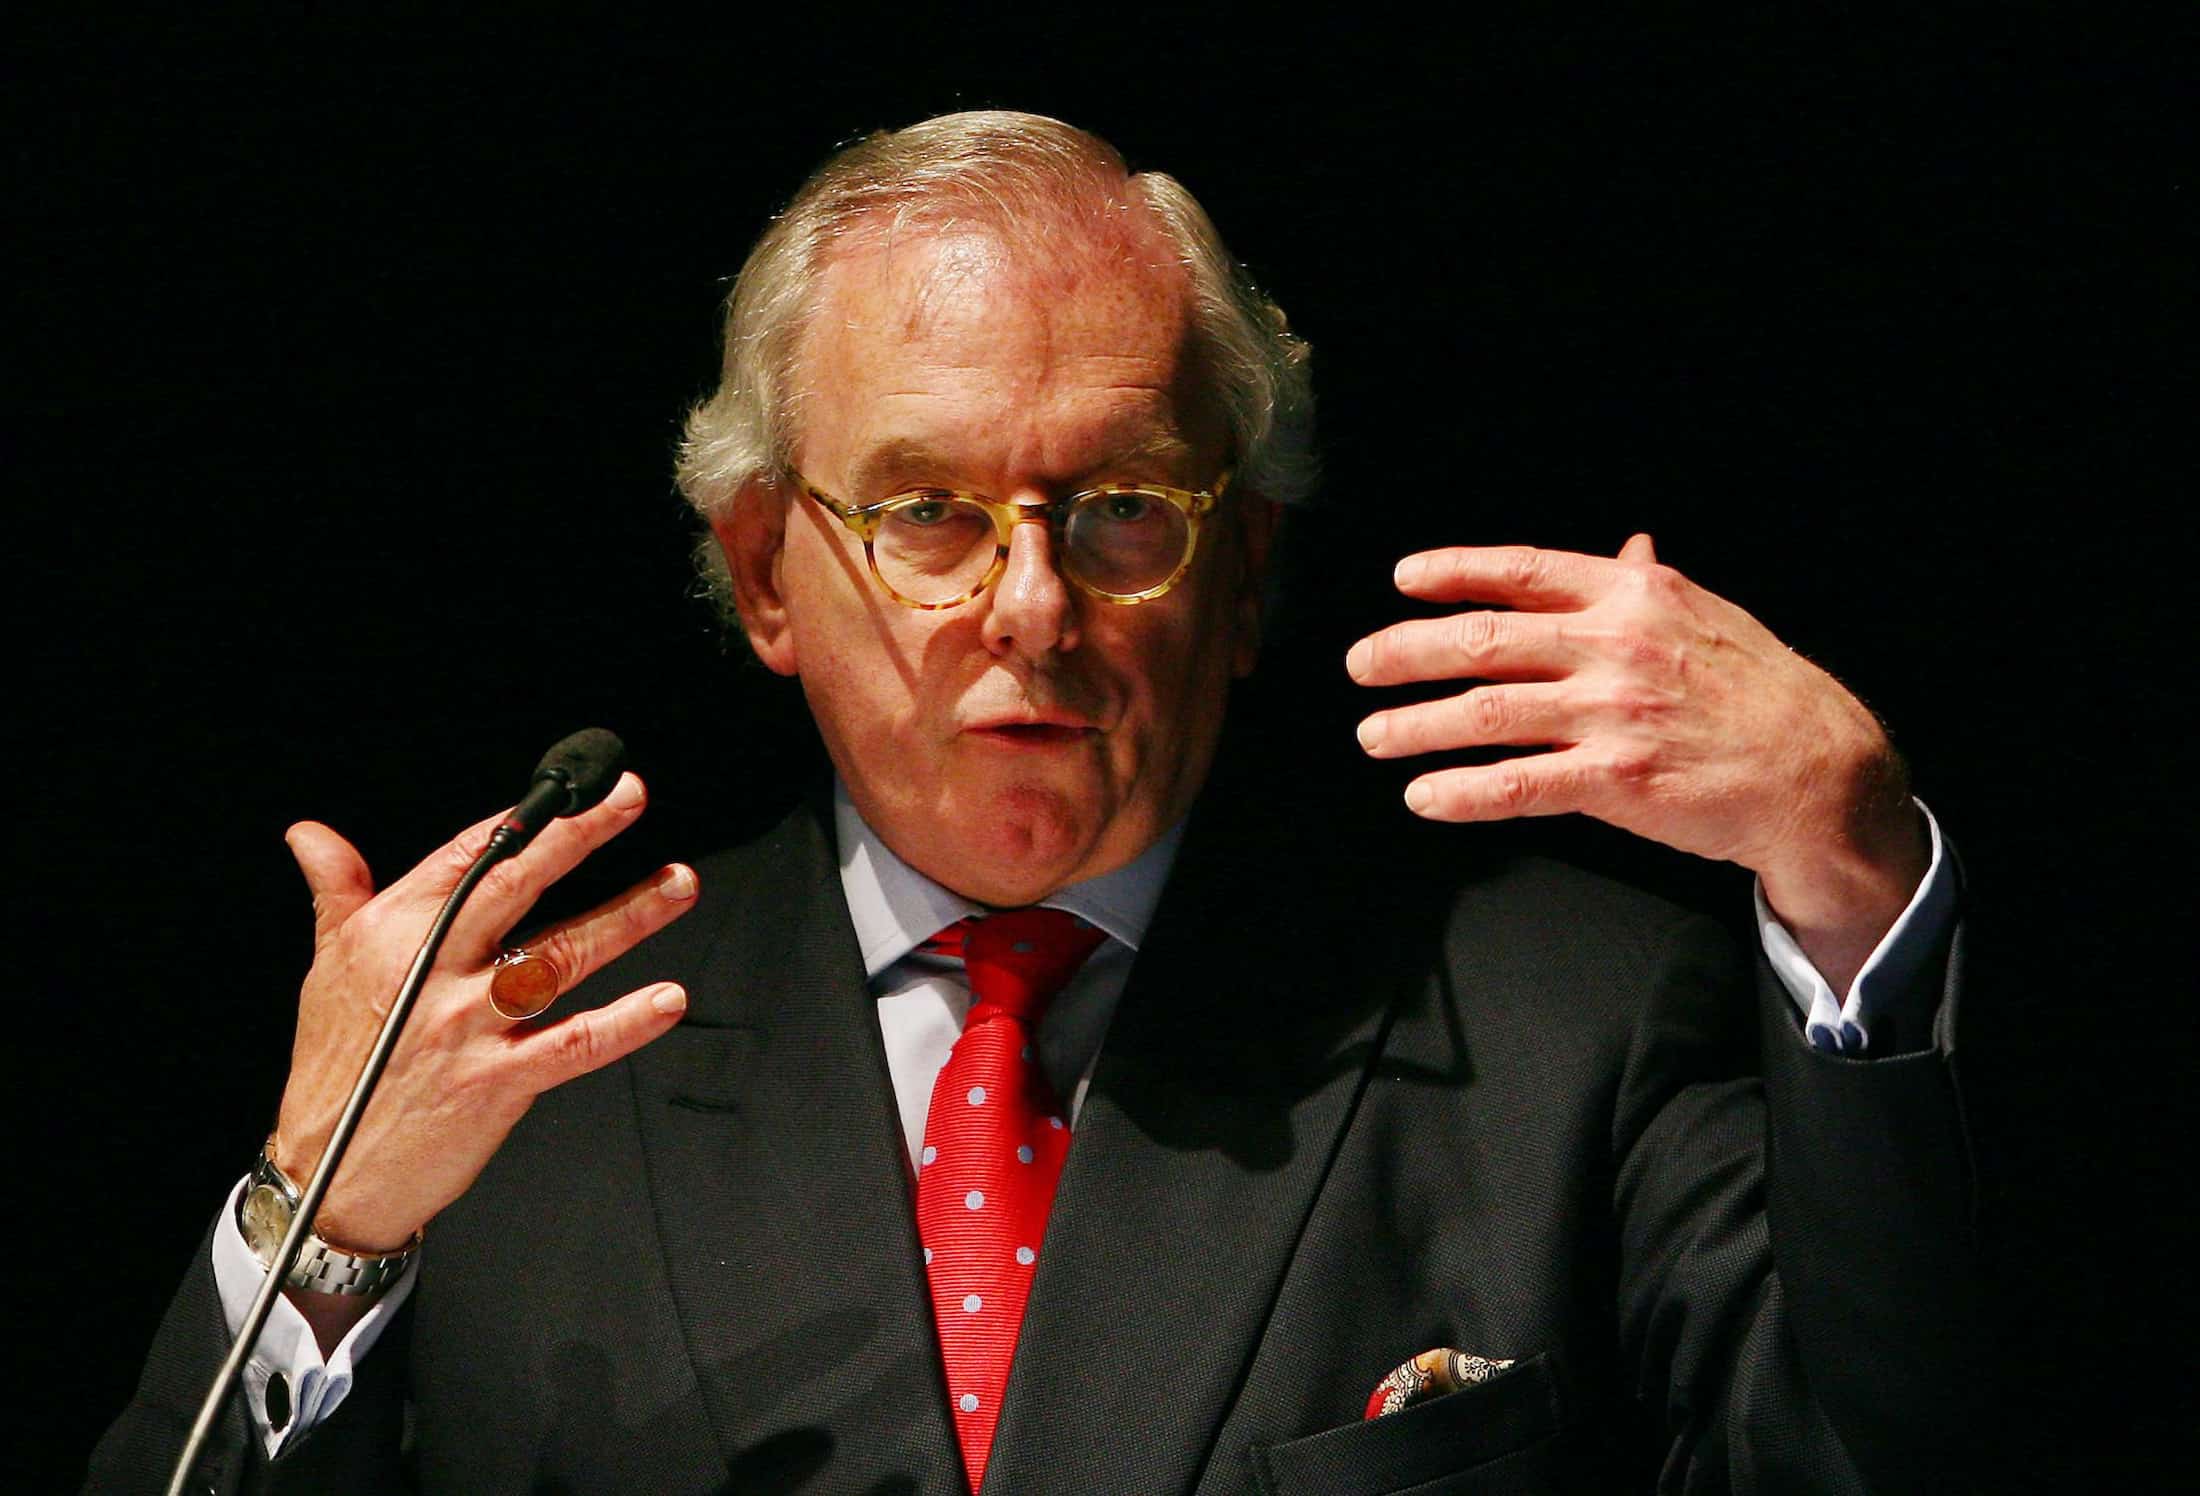 Police investigation launched over David Starkey interview were he said their are ‘so many damn blacks’